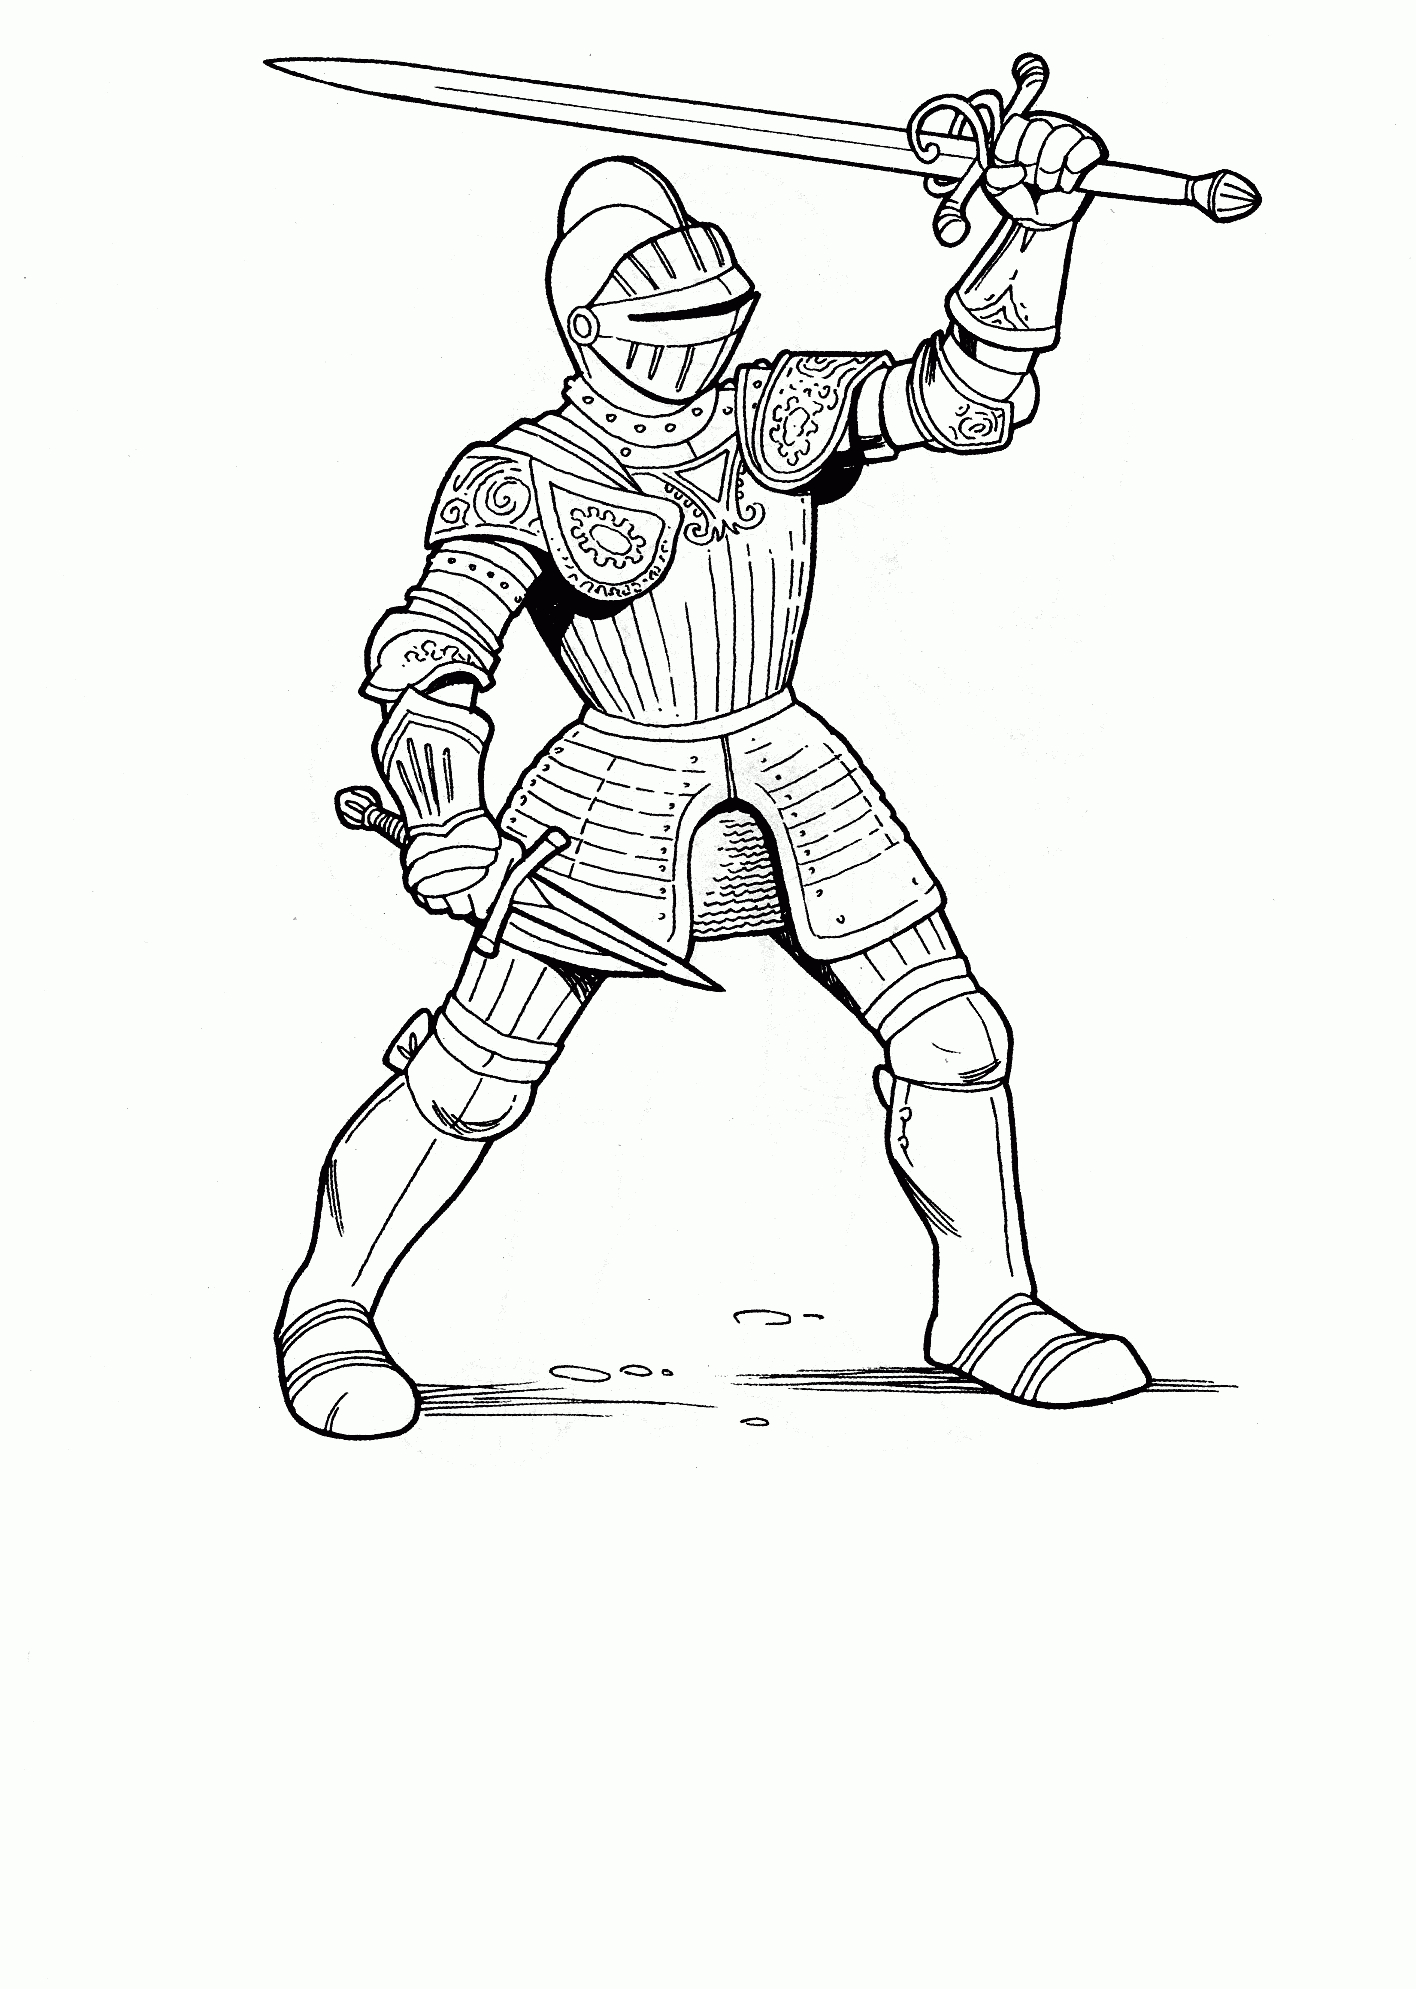 knight-coloring-sheets-01-coloring-coloring-pages-color-free